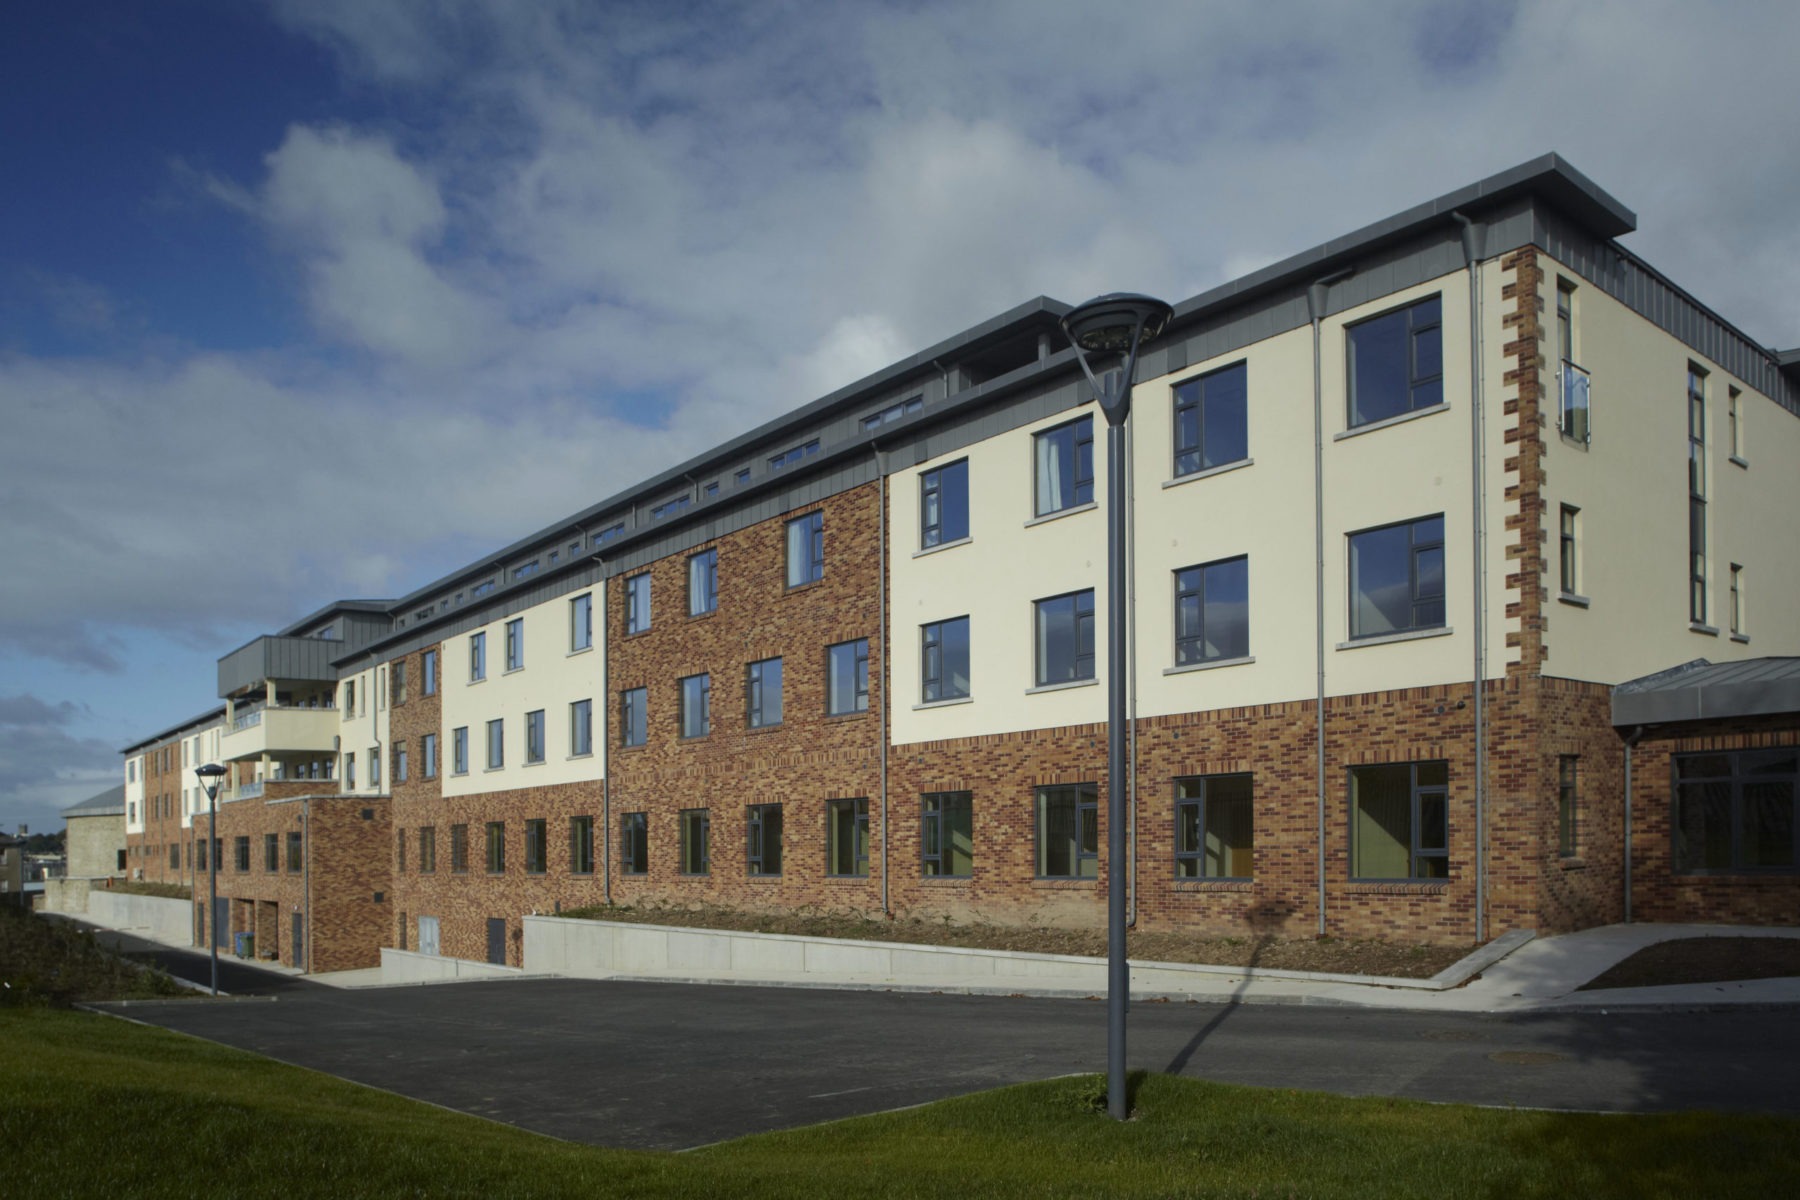 ST. JOSEPH’S CARE HOME, FERRYBANK, WATERFORD